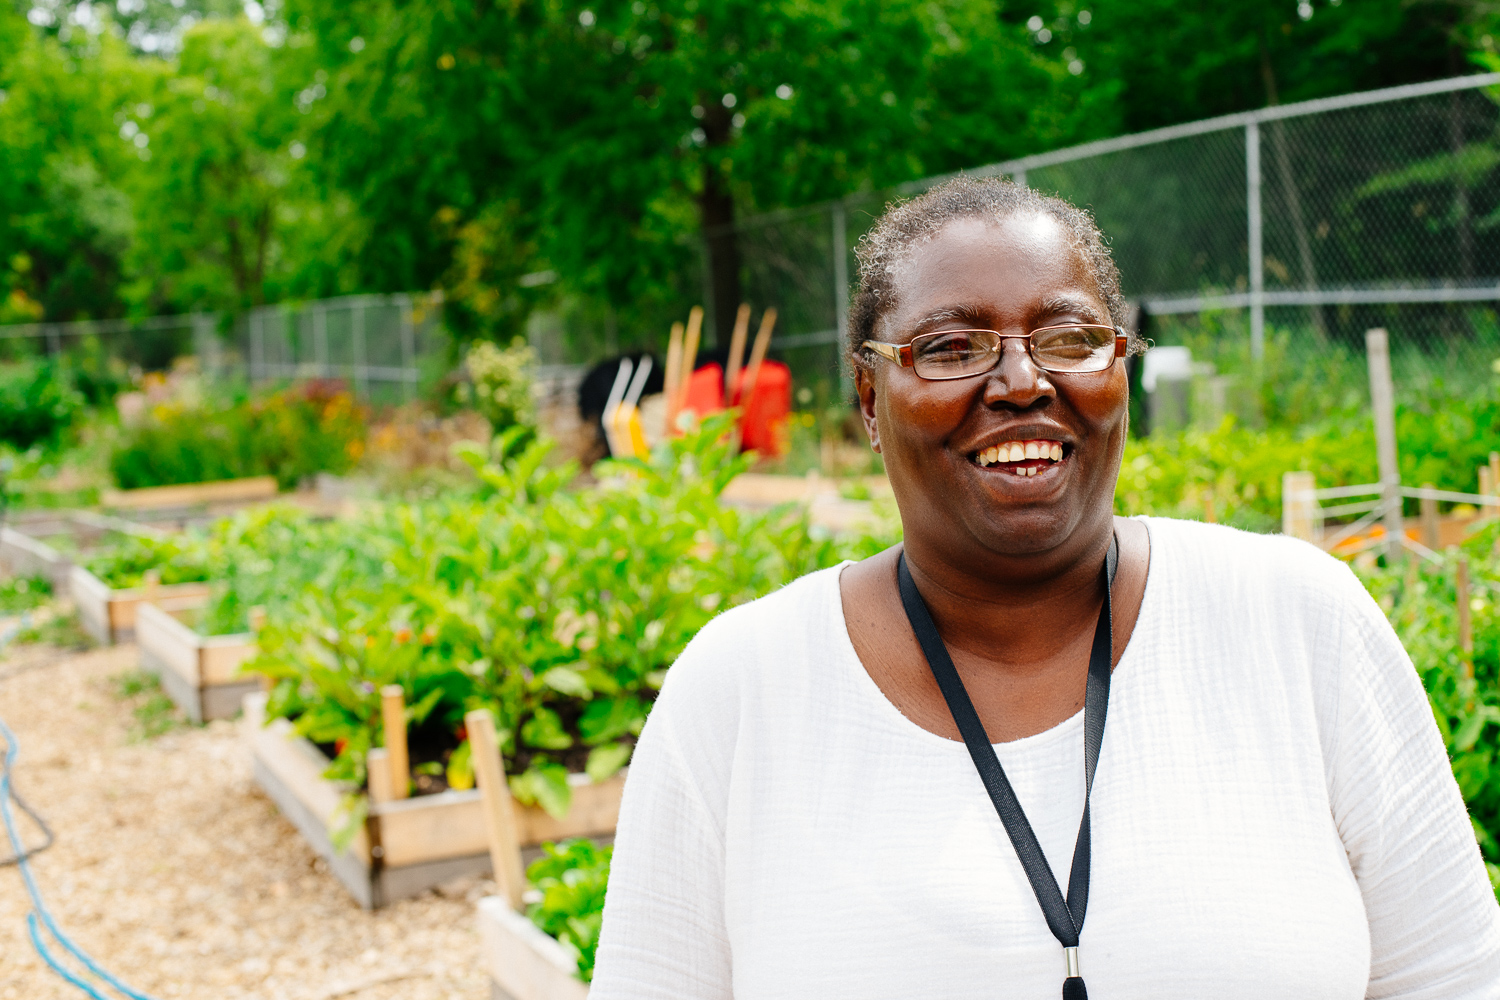 A black woman in a white shirt looks directly at the camera and smiles. Behind her is a group of vegetable gardens.